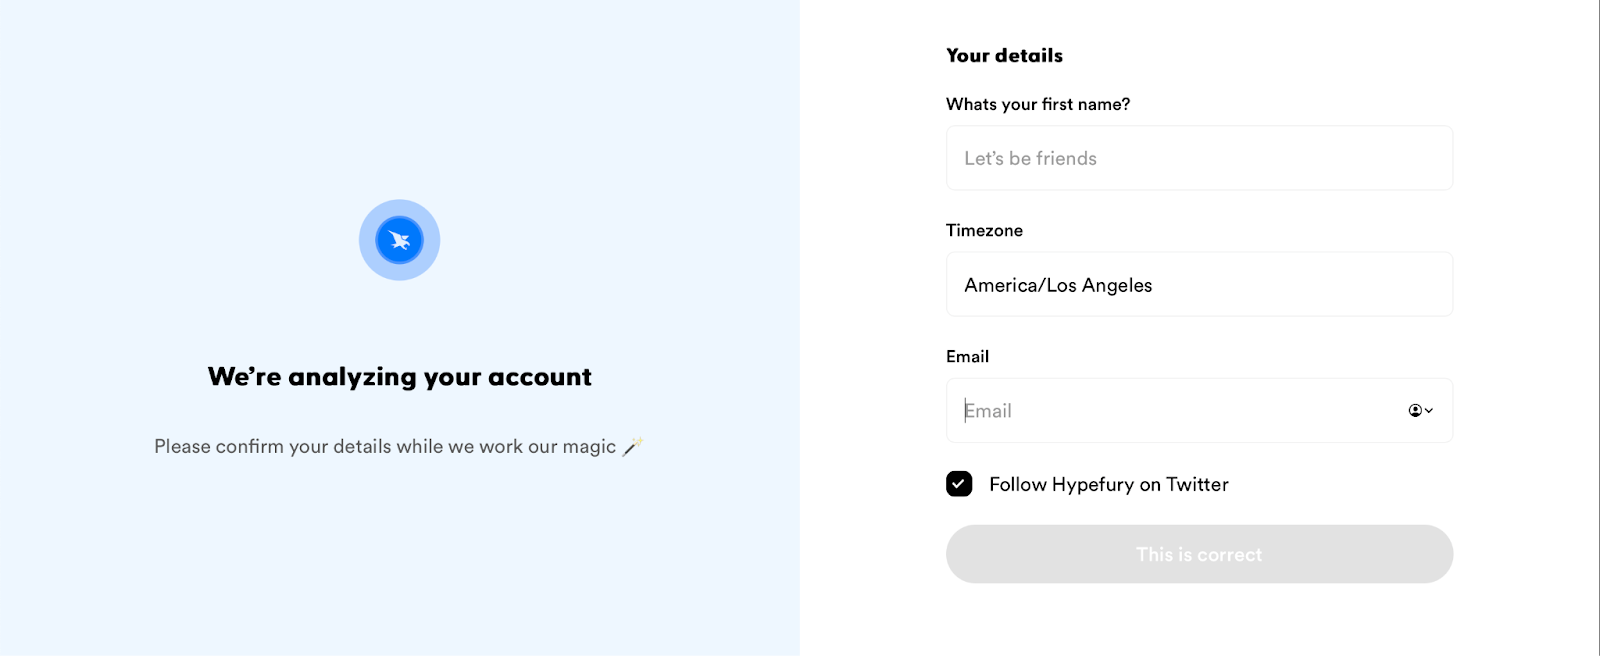 The intitial form that users are required to fill out when registering with Hypefury. 